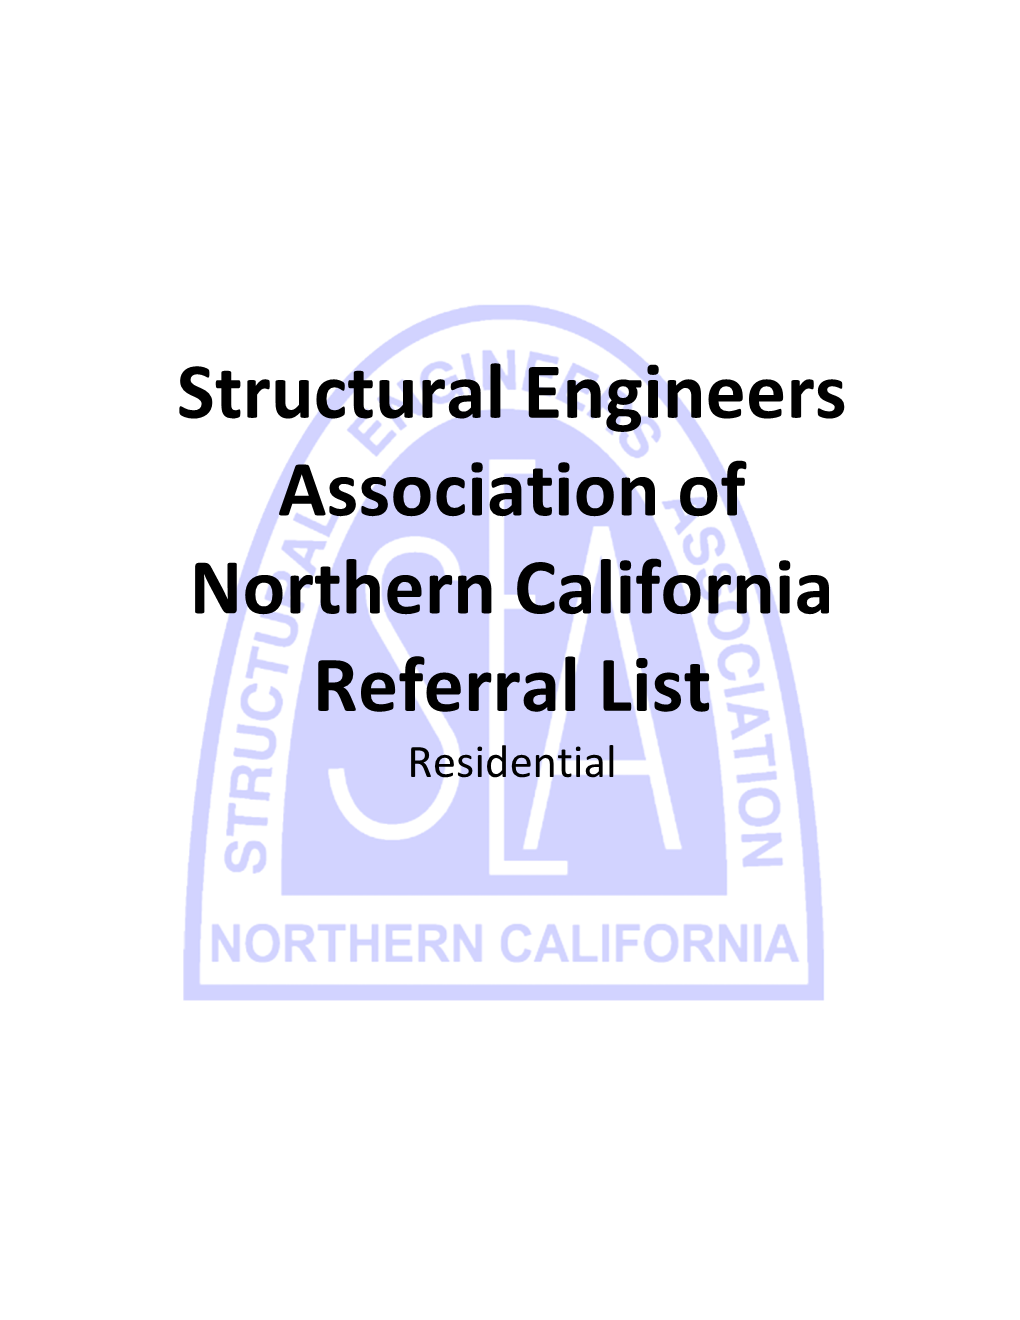 Structural Engineers Association of Northern California Referral List Residential